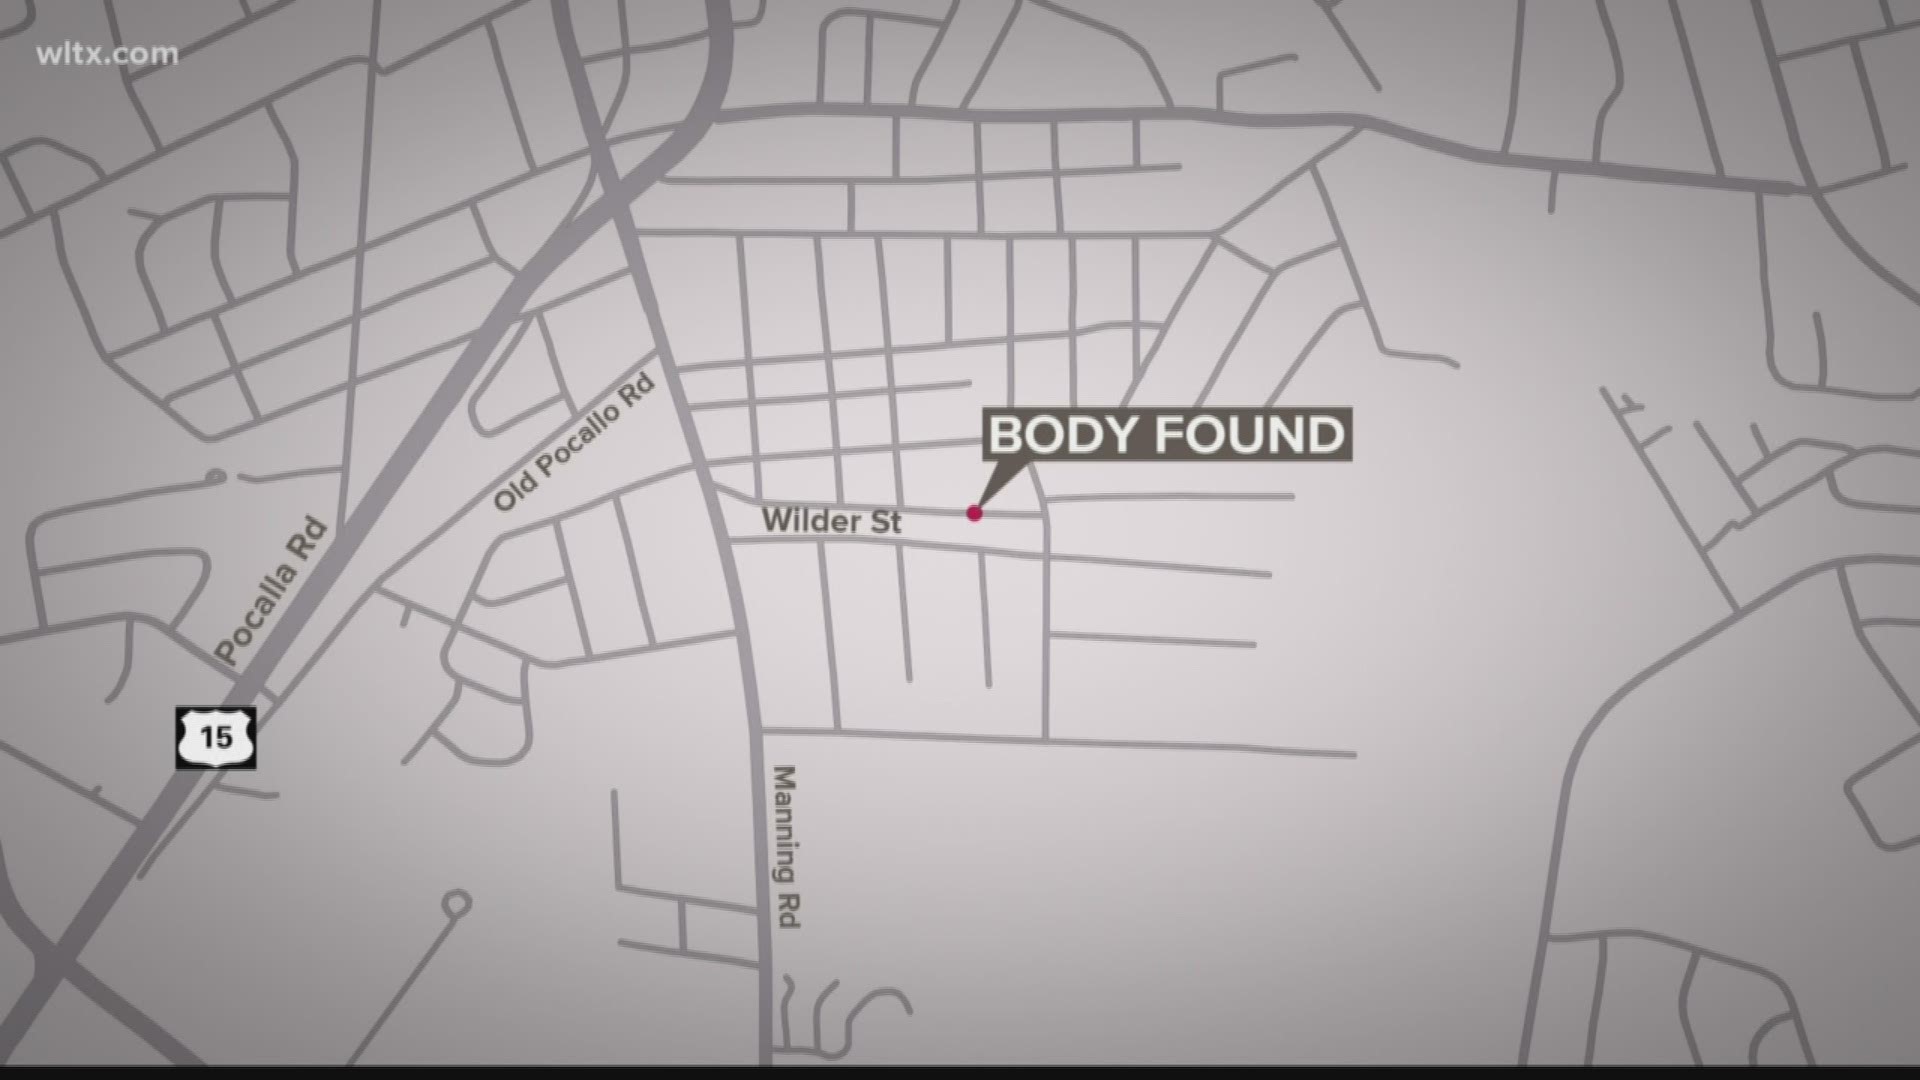 The body was found in the front yard of an abandoned house, according to officials.